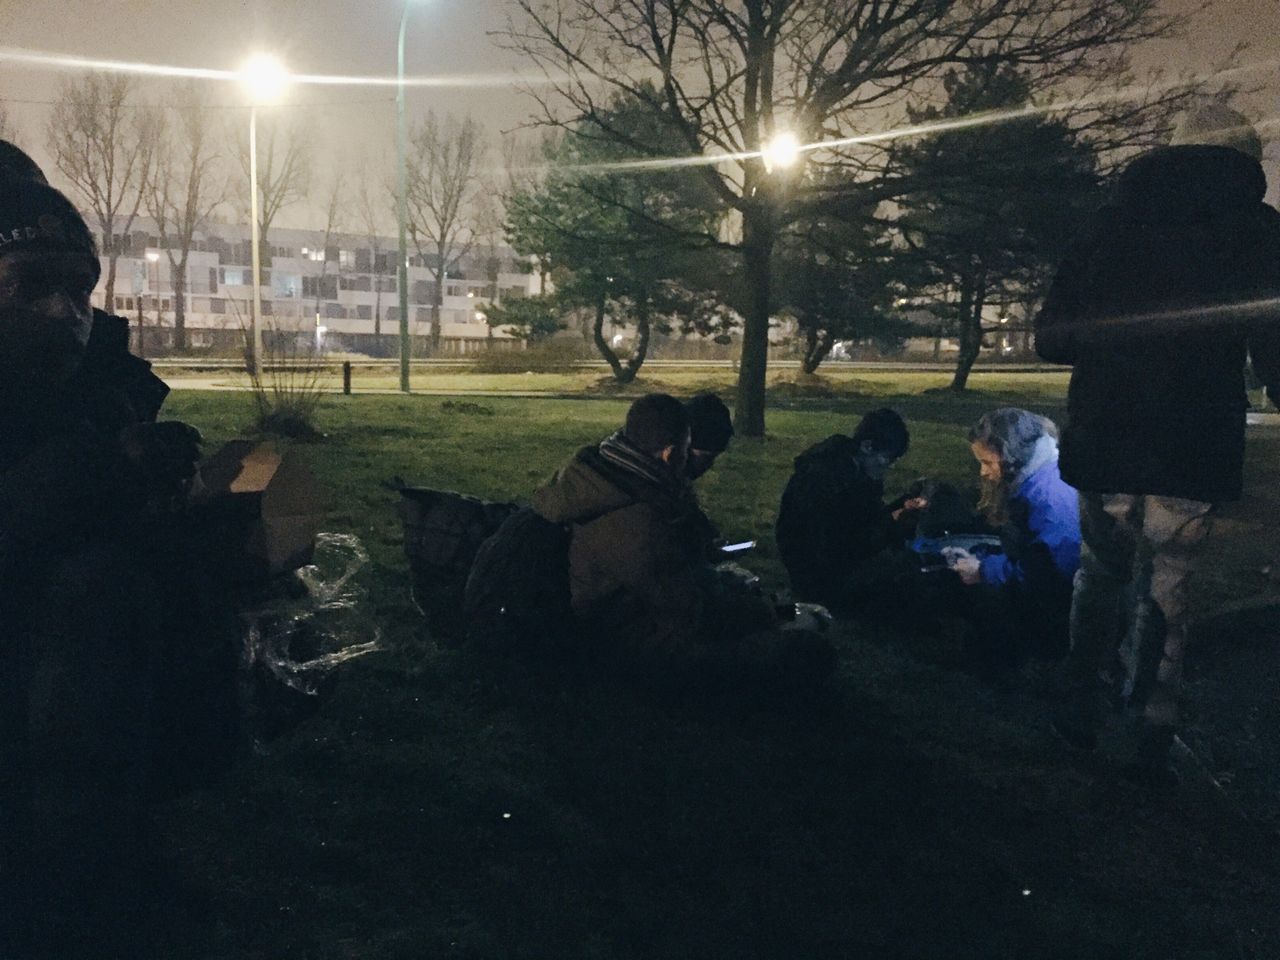 Campaigners have said dozens of unaccompanied children have begun arriving in Calais. This picture, which shows young refugees in a park in the French port town, was taken late last month